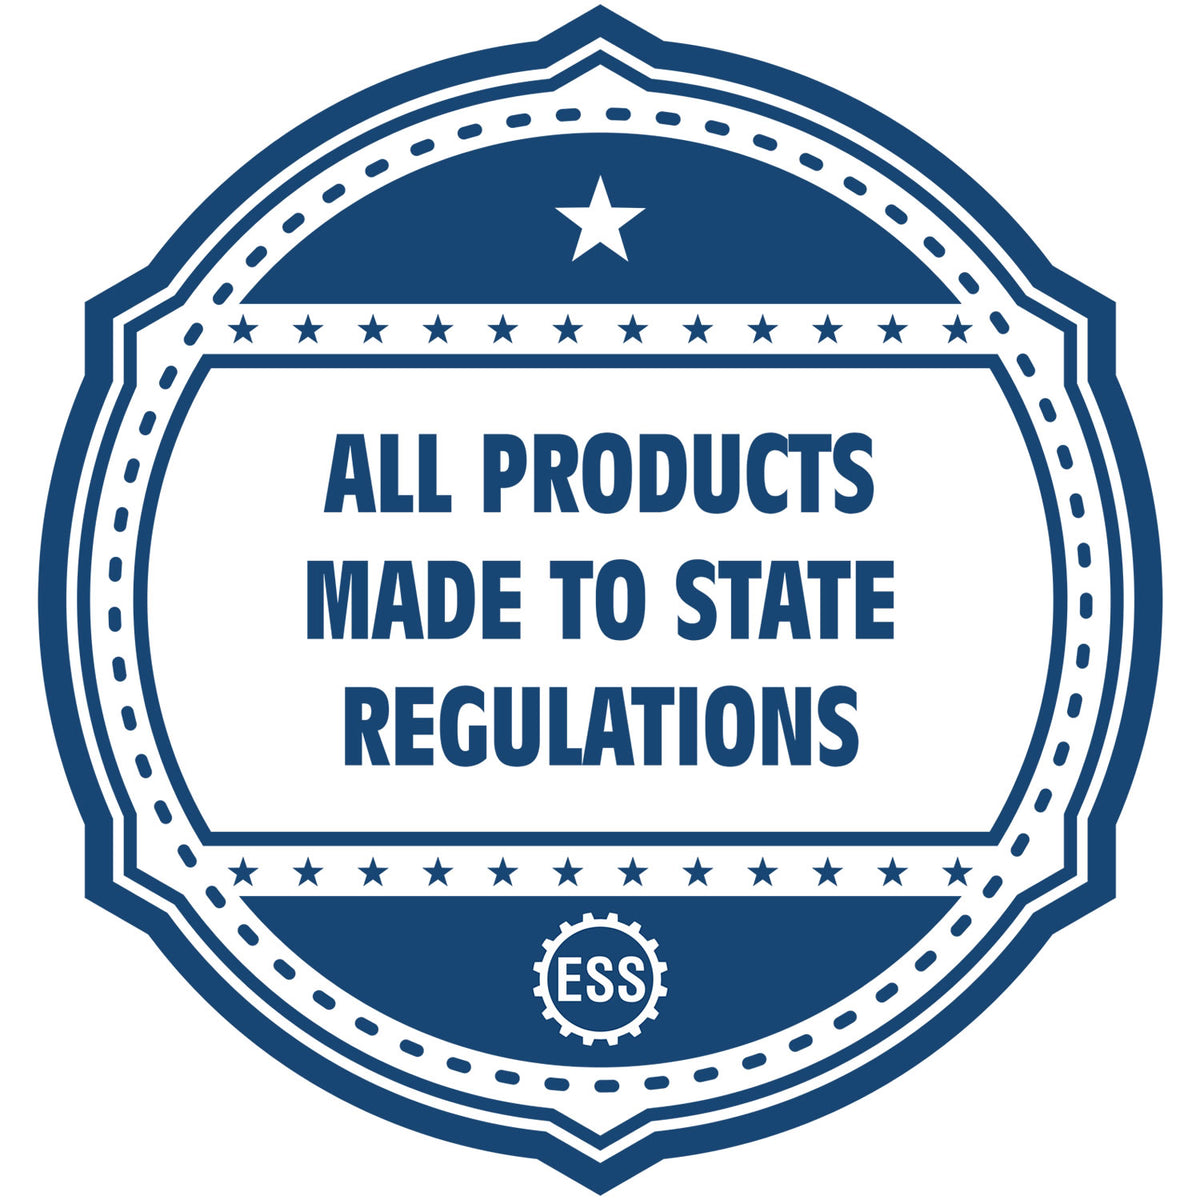 A blue icon or badge for the Hybrid Virginia Landscape Architect Seal showing that this product is made in compliance with state regulations.